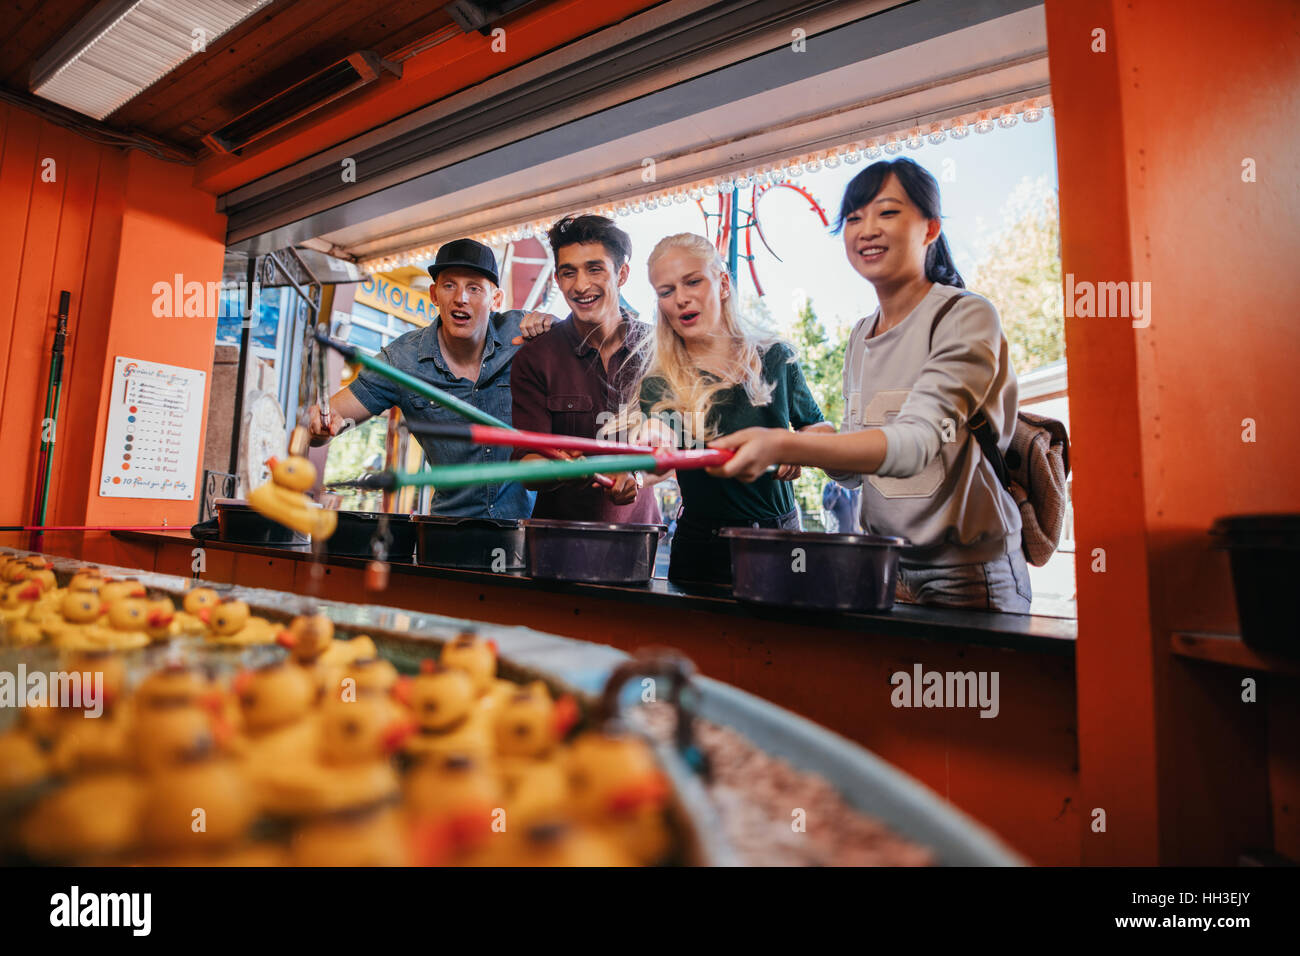 Happy young people having fun at amusement park playing fishing game. Group of friends playing fishing game at fairground. Stock Photo